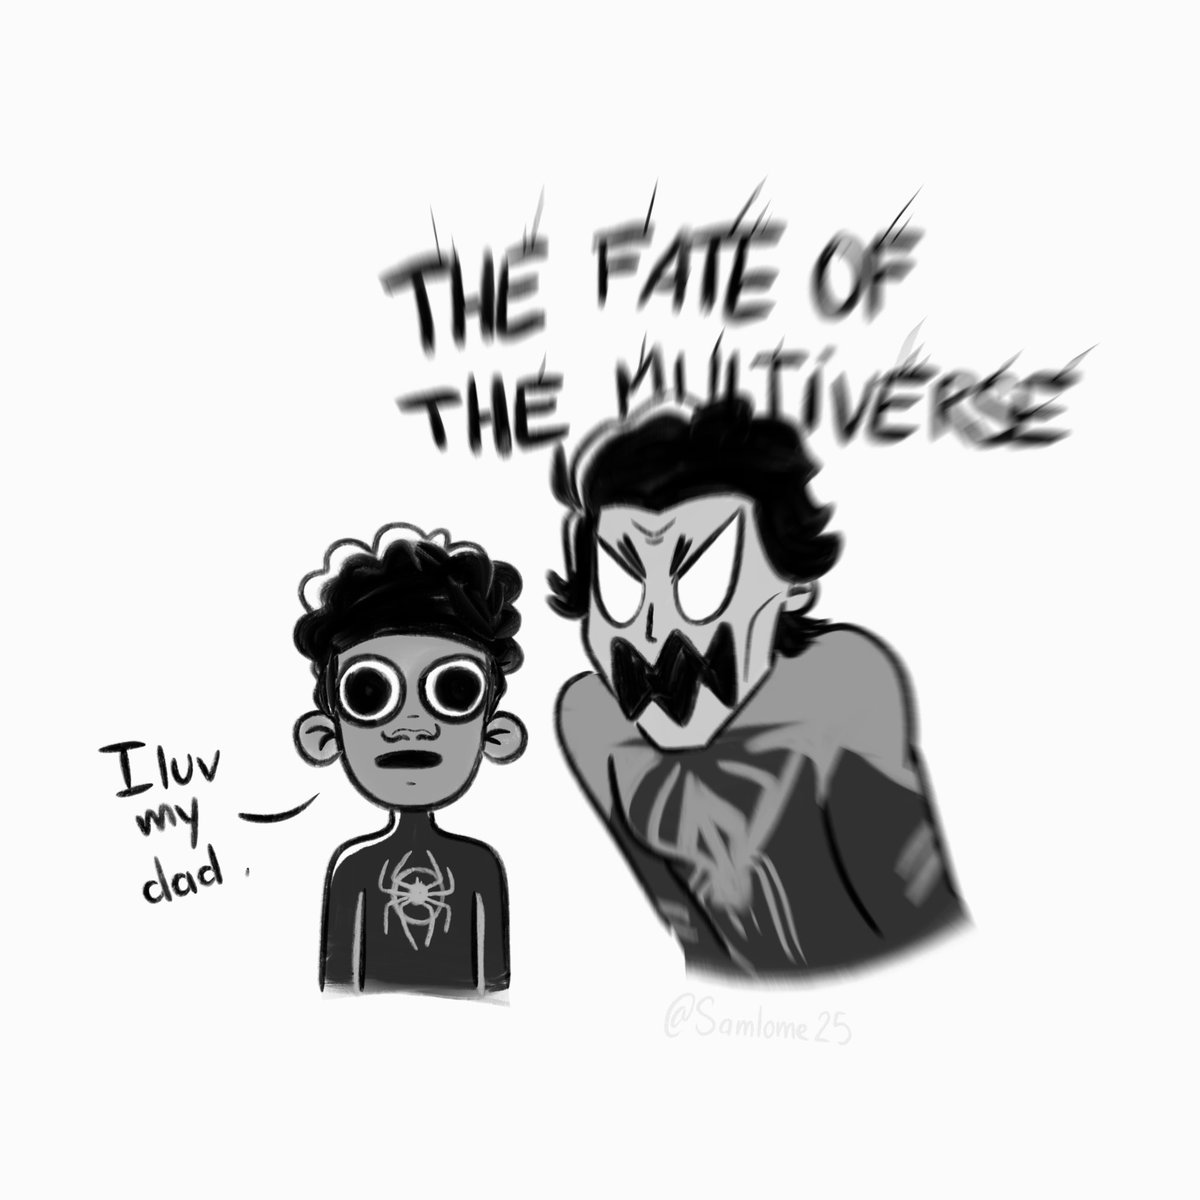 Sorry I can’t post a lot guys, I have a lot of work at school😔 (so here’s a doodle I made in class)
#MilesMorales #MiguelOHara #ATSV